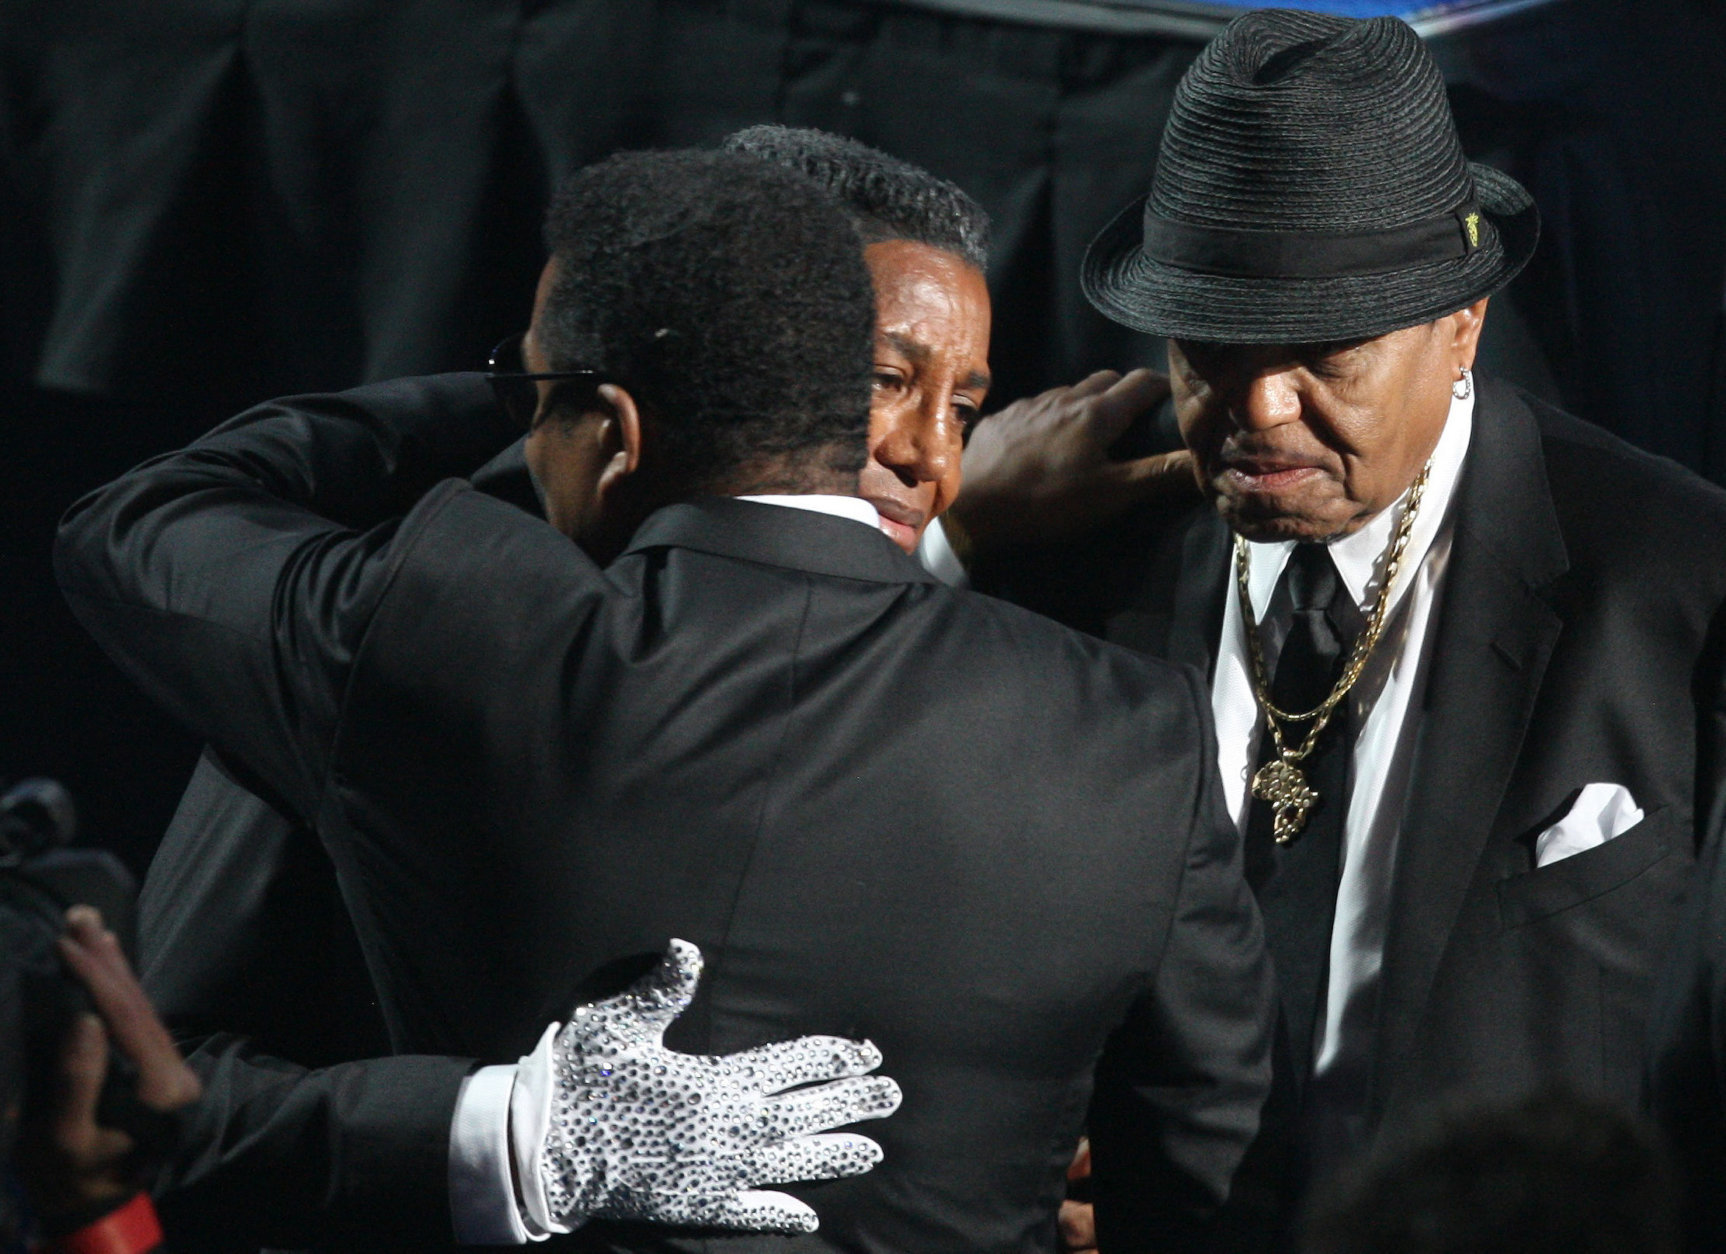 Brothers Jermaine, left, and Jackie, back to the camera, embrace as their father Joe Jackson, right, watches, during memorial services for Michael Jackson at the Staples Center in Los Angeles on Tuesday, July 7, 2009. (AP Photo/Mario Anzuoni, Pool)